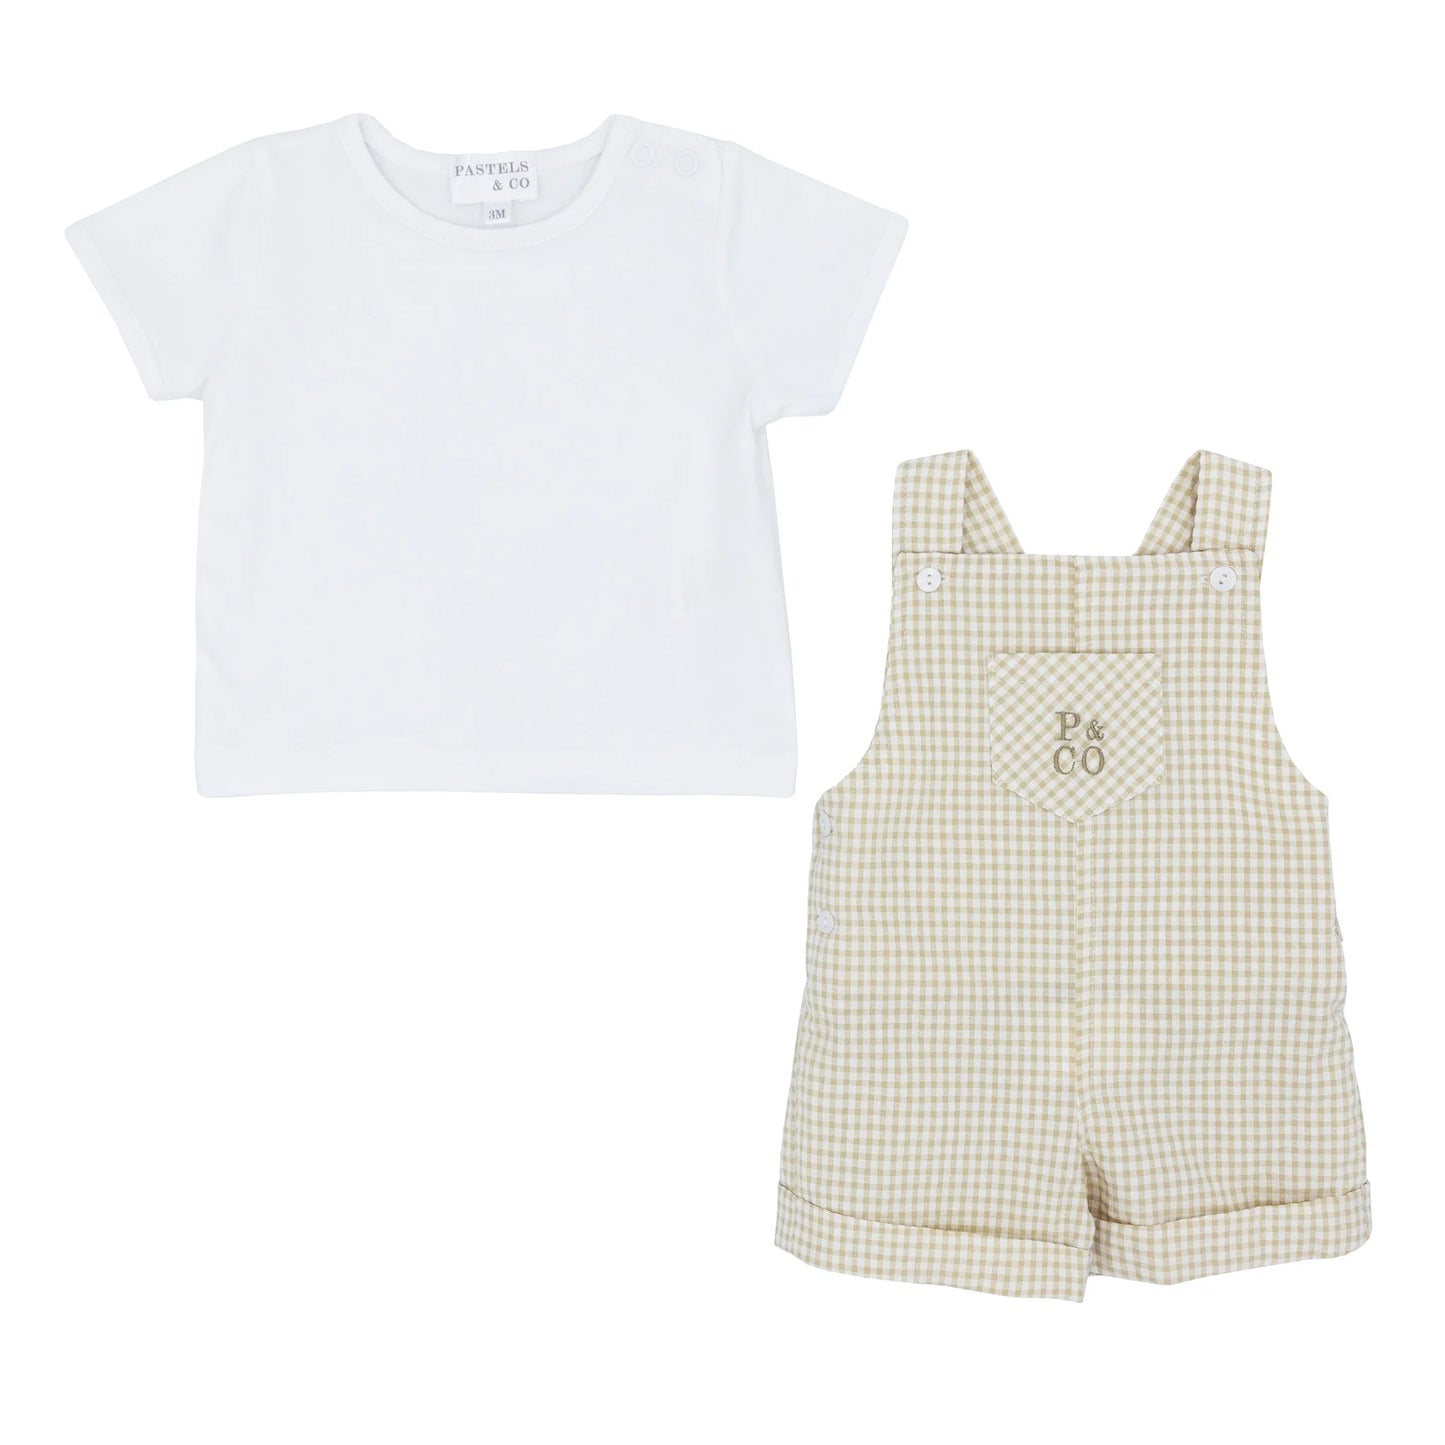 Pastels & Co Boys Glasgow Dungaree SS23